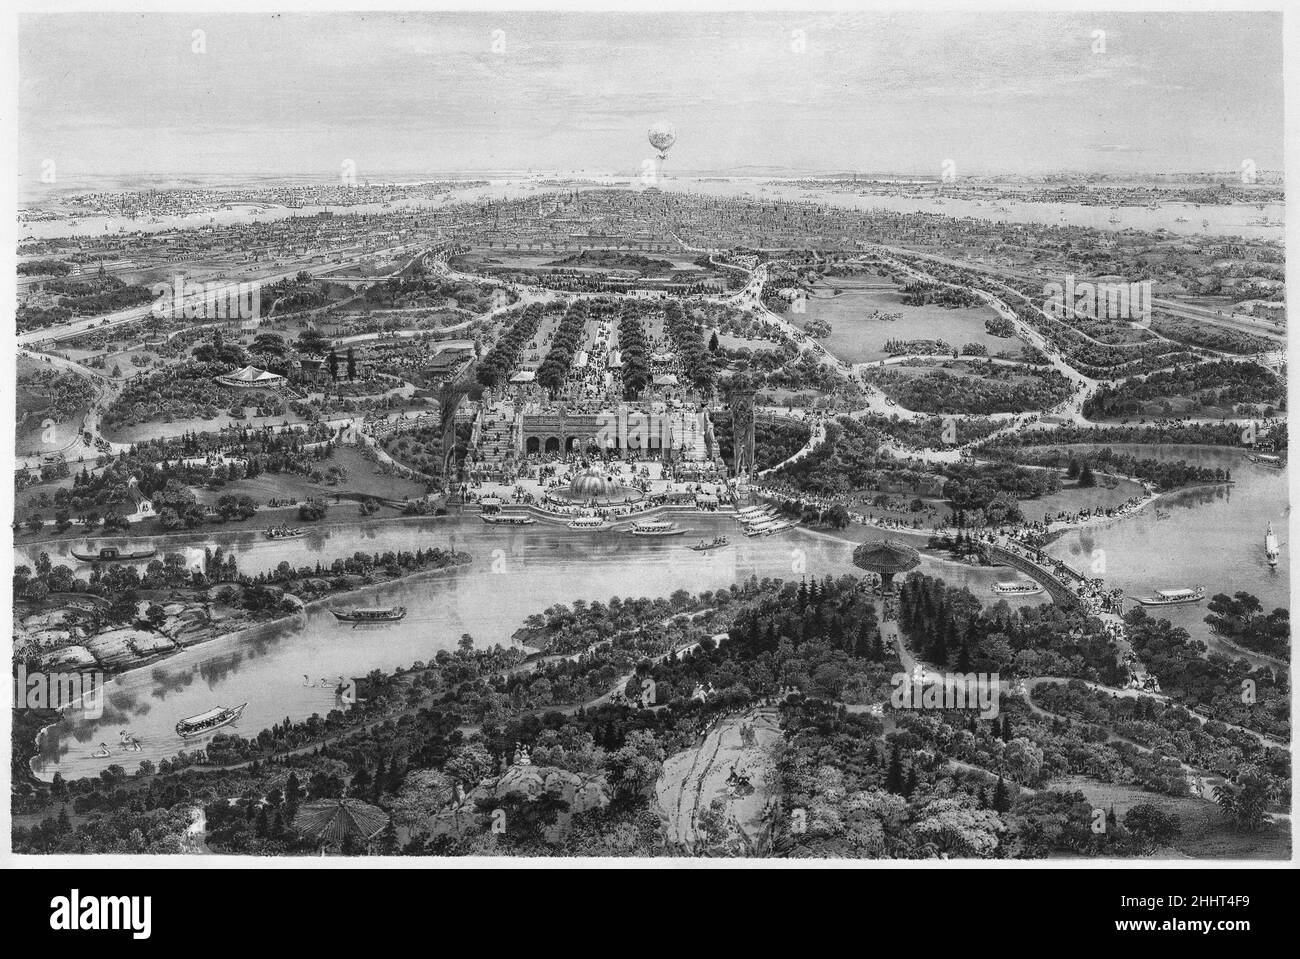 Central Park (Summer) 1865 Julius Bien American This birds eye view looks down on Central Park from above the hill north of the Lake. The middle ground is anchored by Bethesda Terrace, with exaggeratedly tall banners marking the boat landing. The prominent fountain is not yet topped by the 'Angel of the Waters' sculpture, which would be added in 1873. The mall extends beyond the terrace and ends in an east-west ground-level drive which later would be replaced by the sunken 65th Street transverse. Further south the Park is largely undeveloped. Bachmann placed a balloon in the sky at the horizon Stock Photo